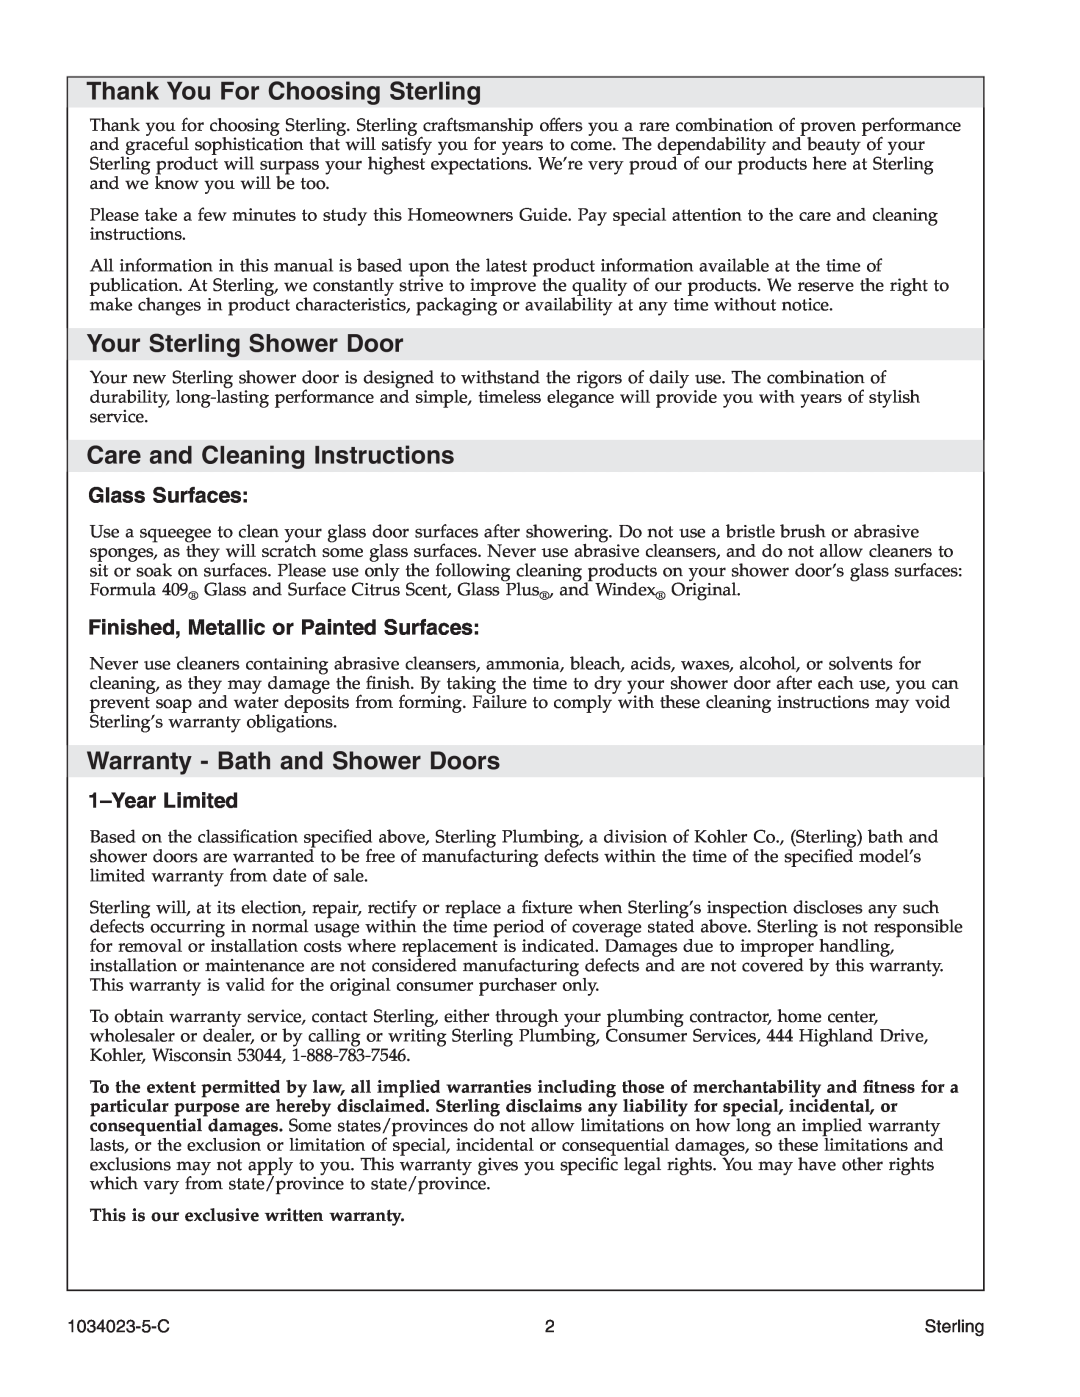 Sterling Plumbing 950C Series Thank You For Choosing Sterling, Your Sterling Shower Door, Care and Cleaning Instructions 